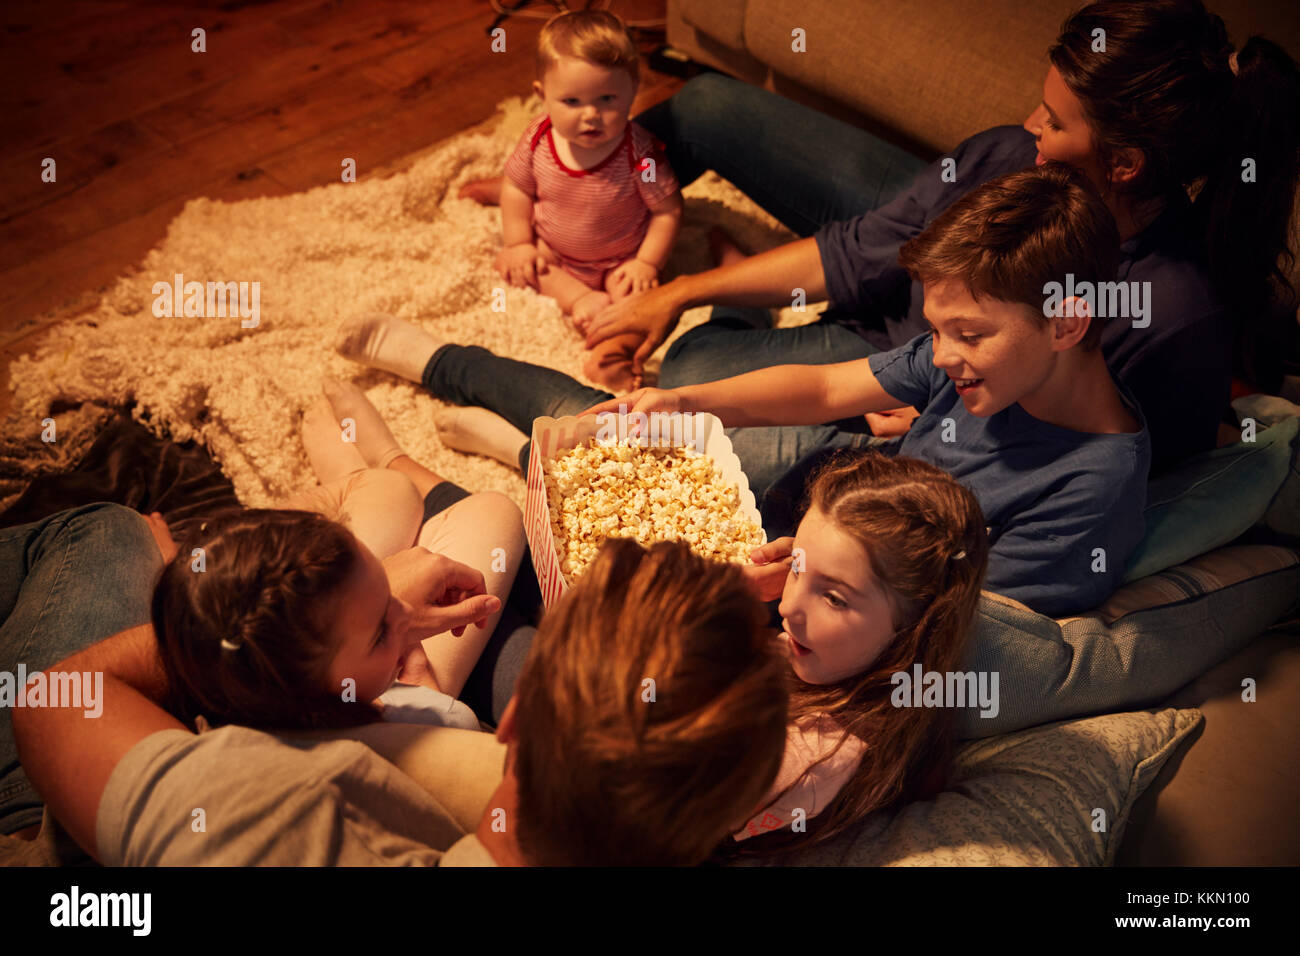 Overhead View Of Family Enjoying Movie Night At Home Together Stock Photo